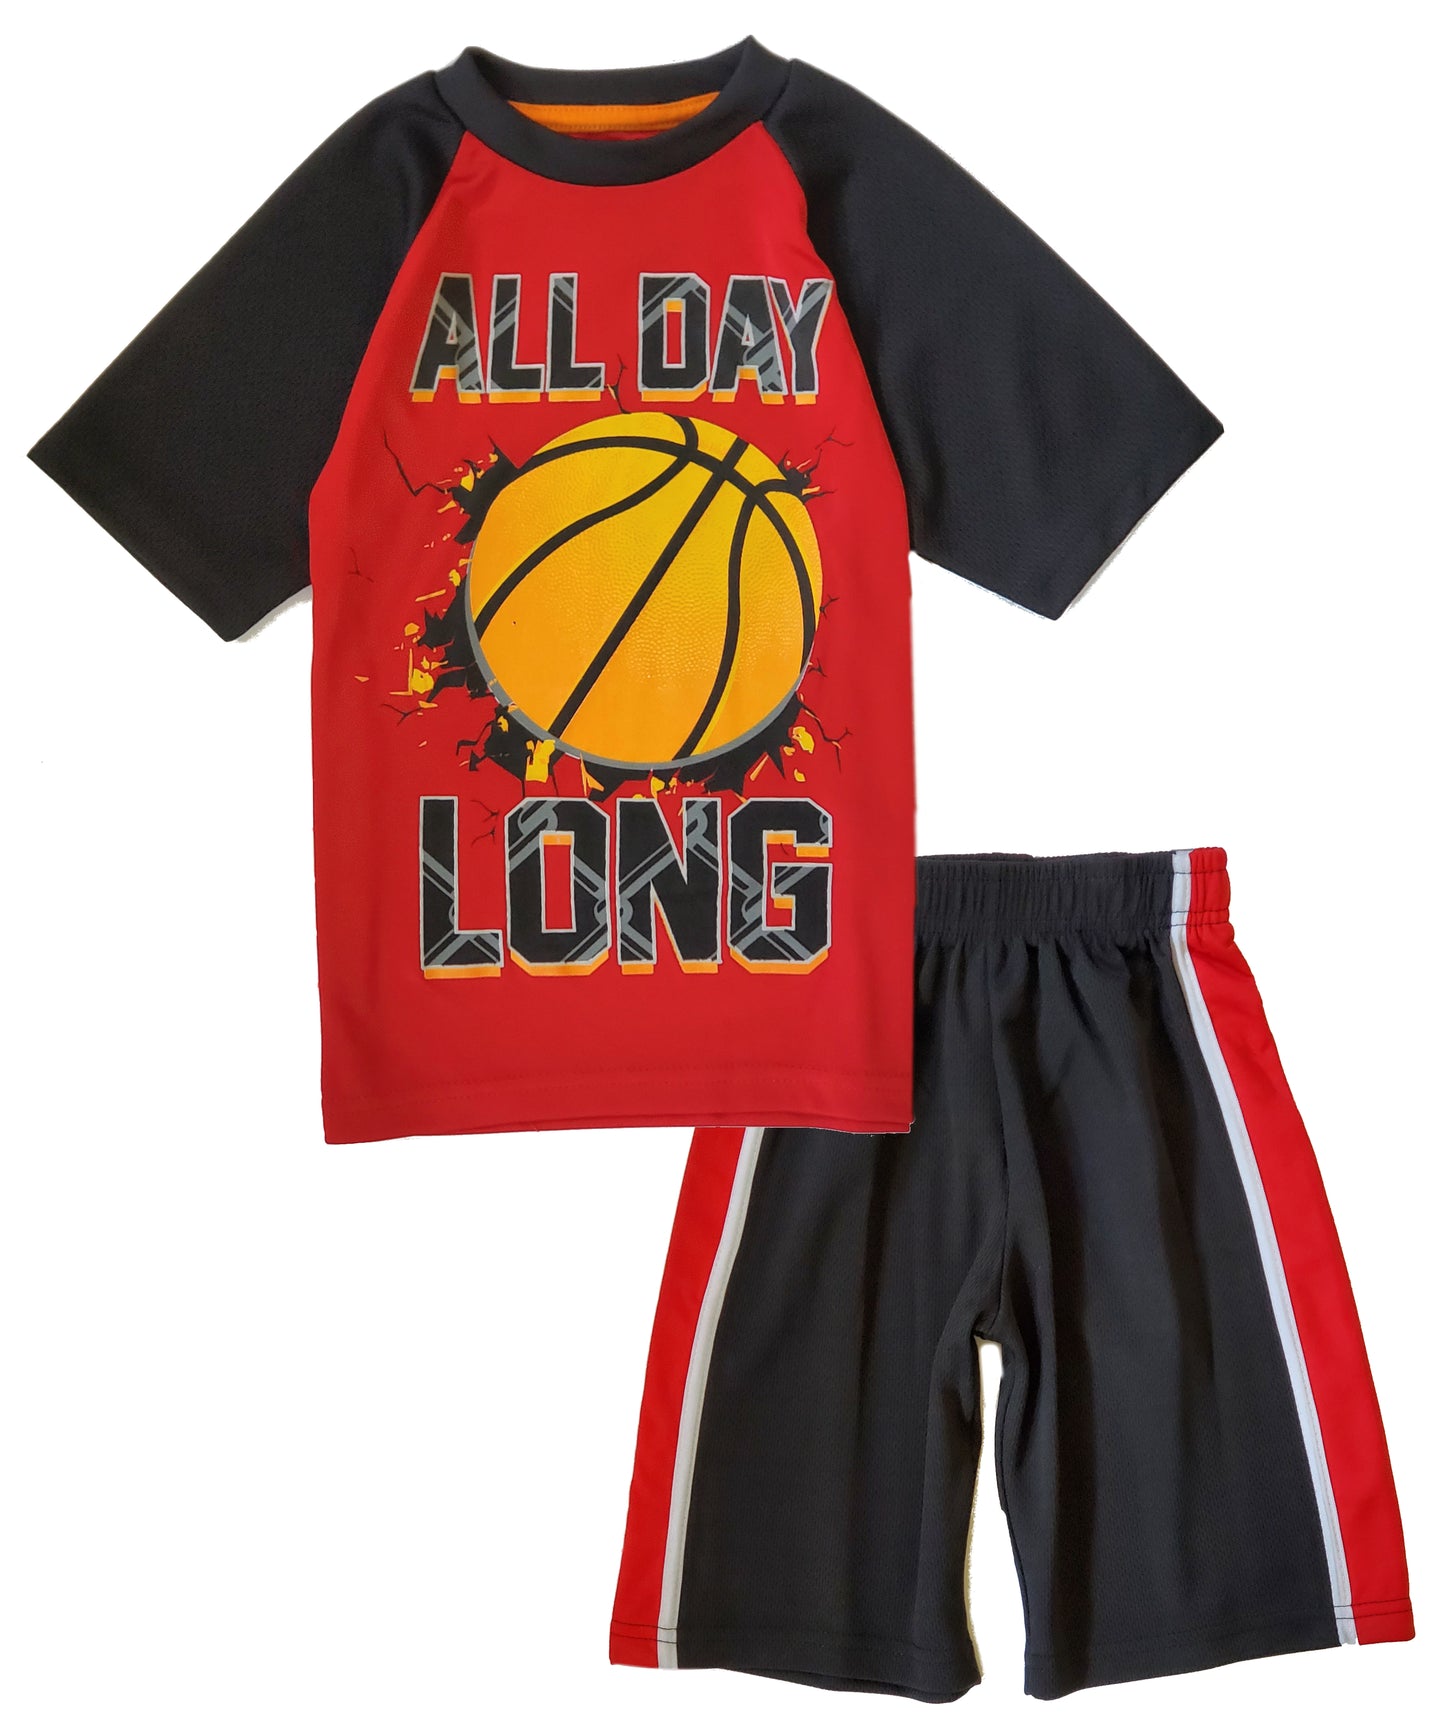 Boys Athletic Shorts Outfit Set Mesh Basketball Jersey  Pack of 6  360 Athletic